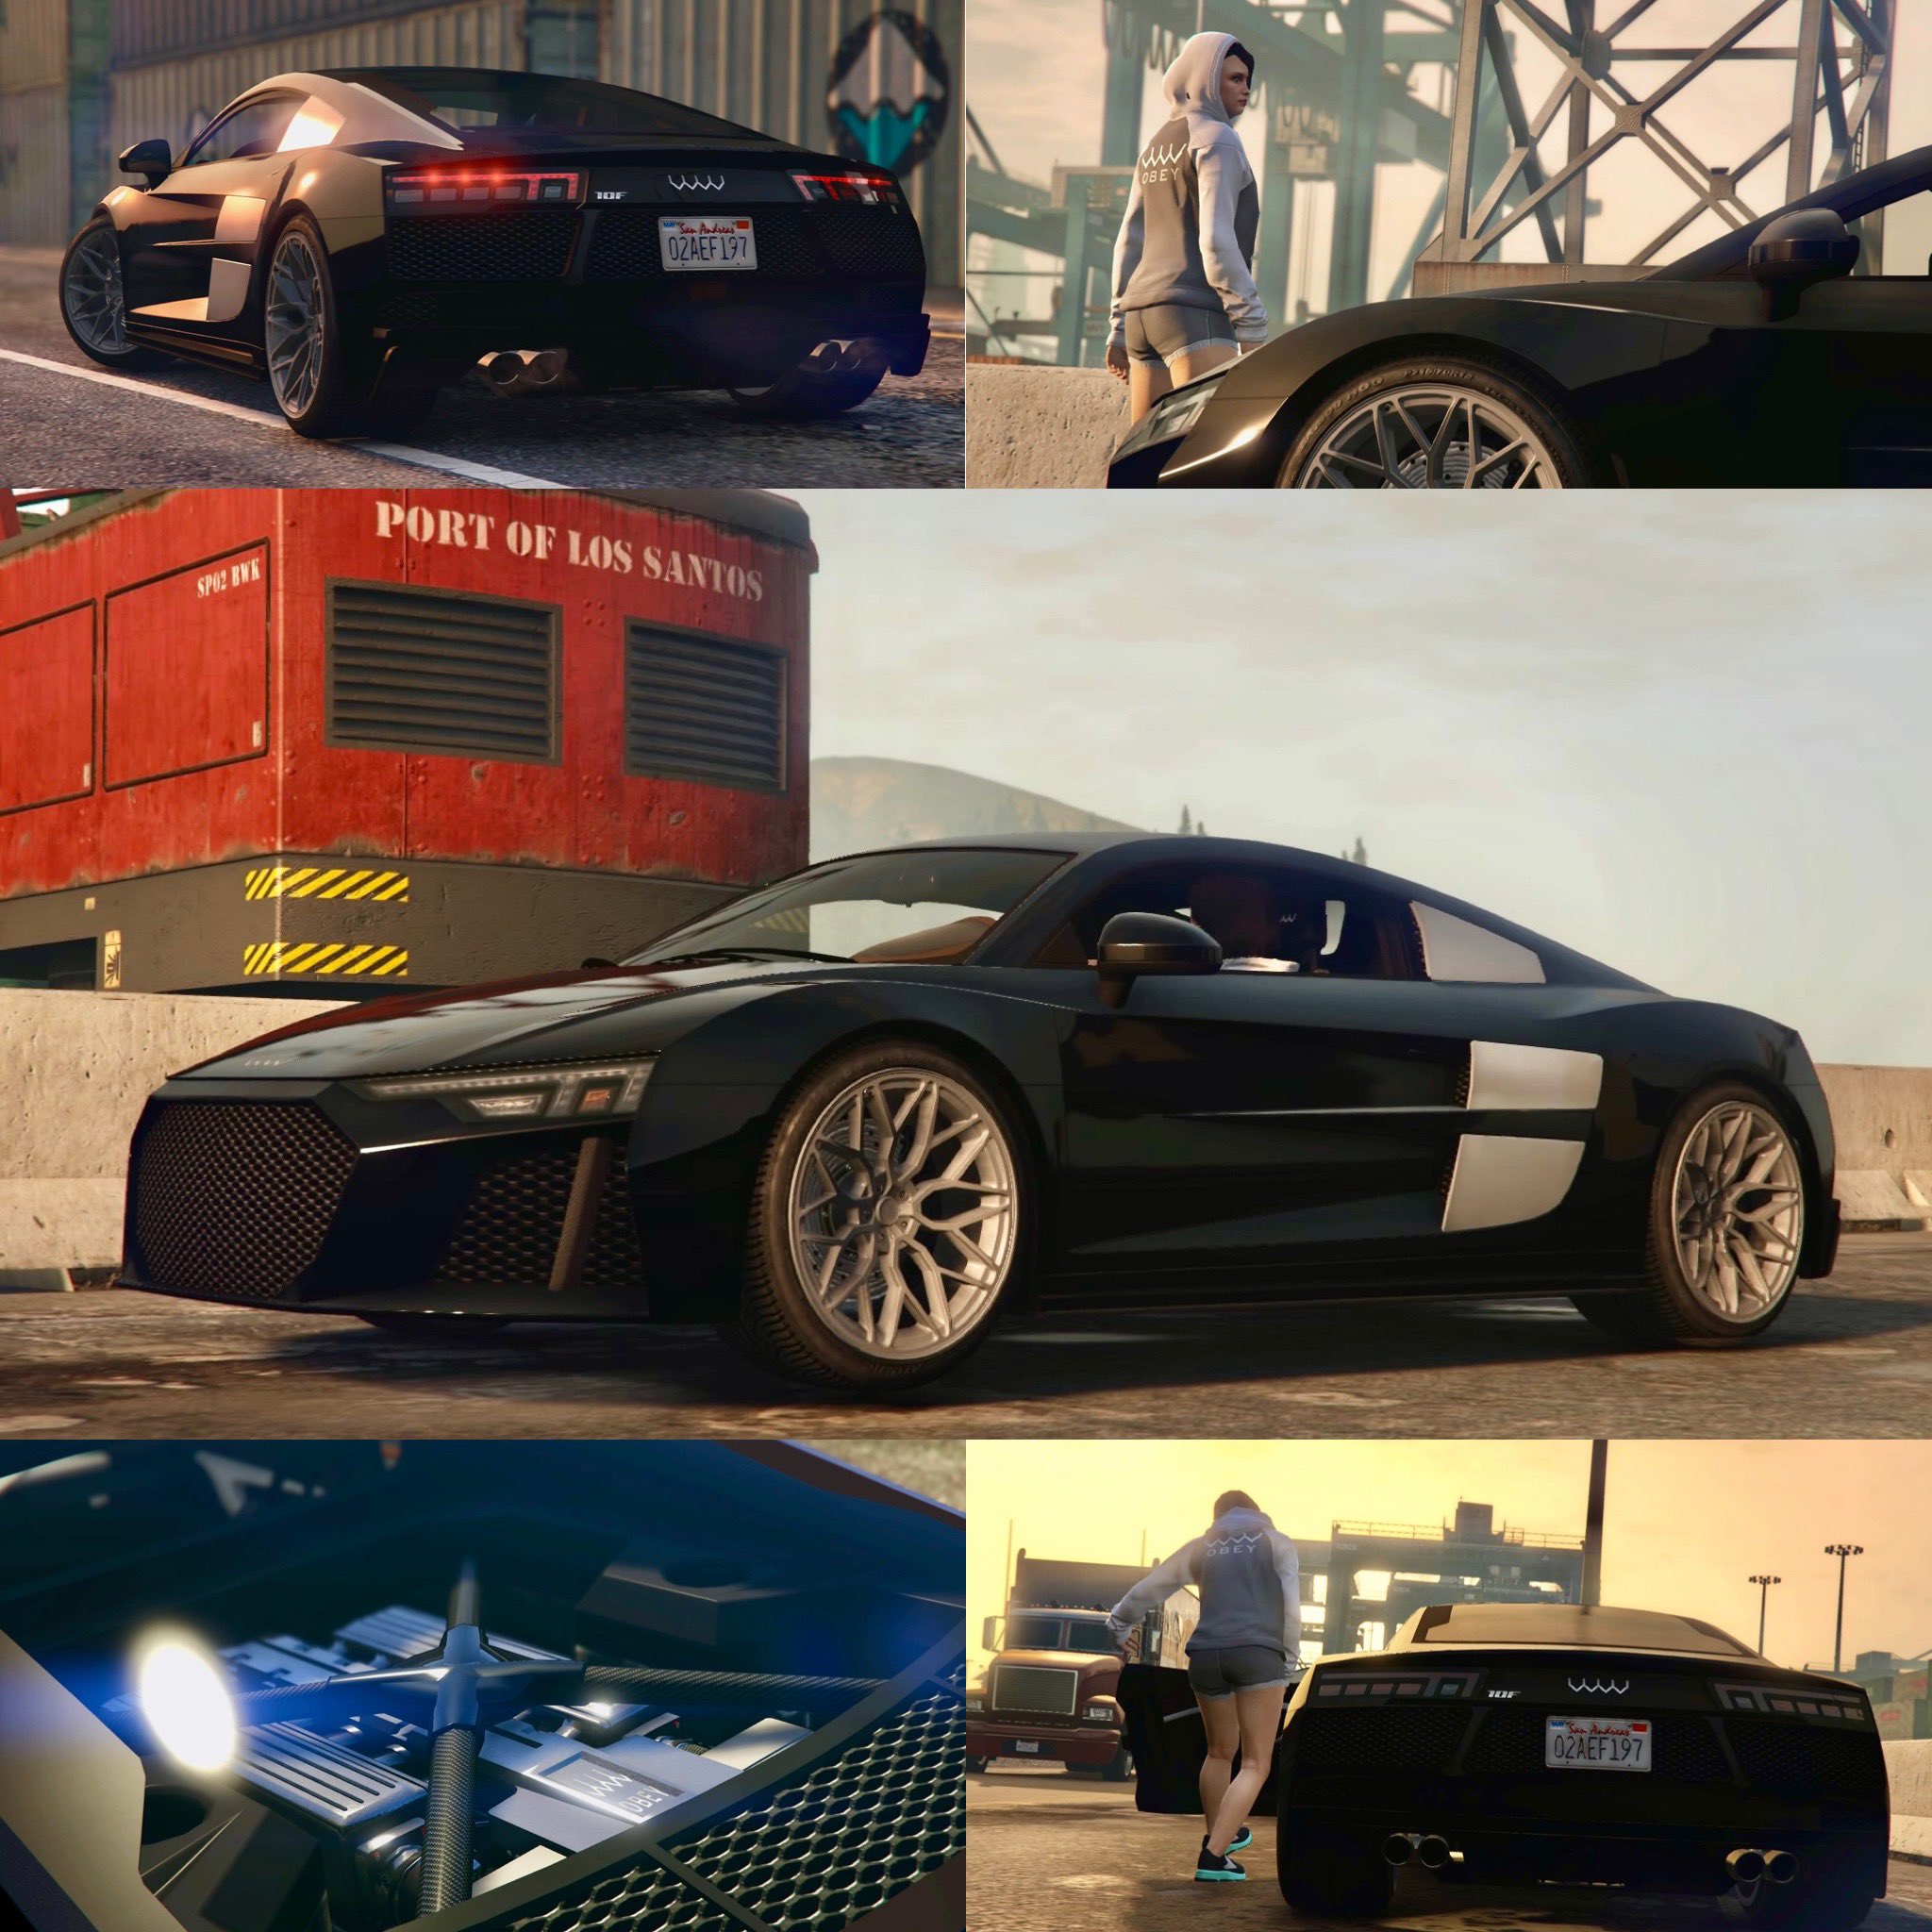 GTA Online weekly update adds new car the Obey 10F Widebody